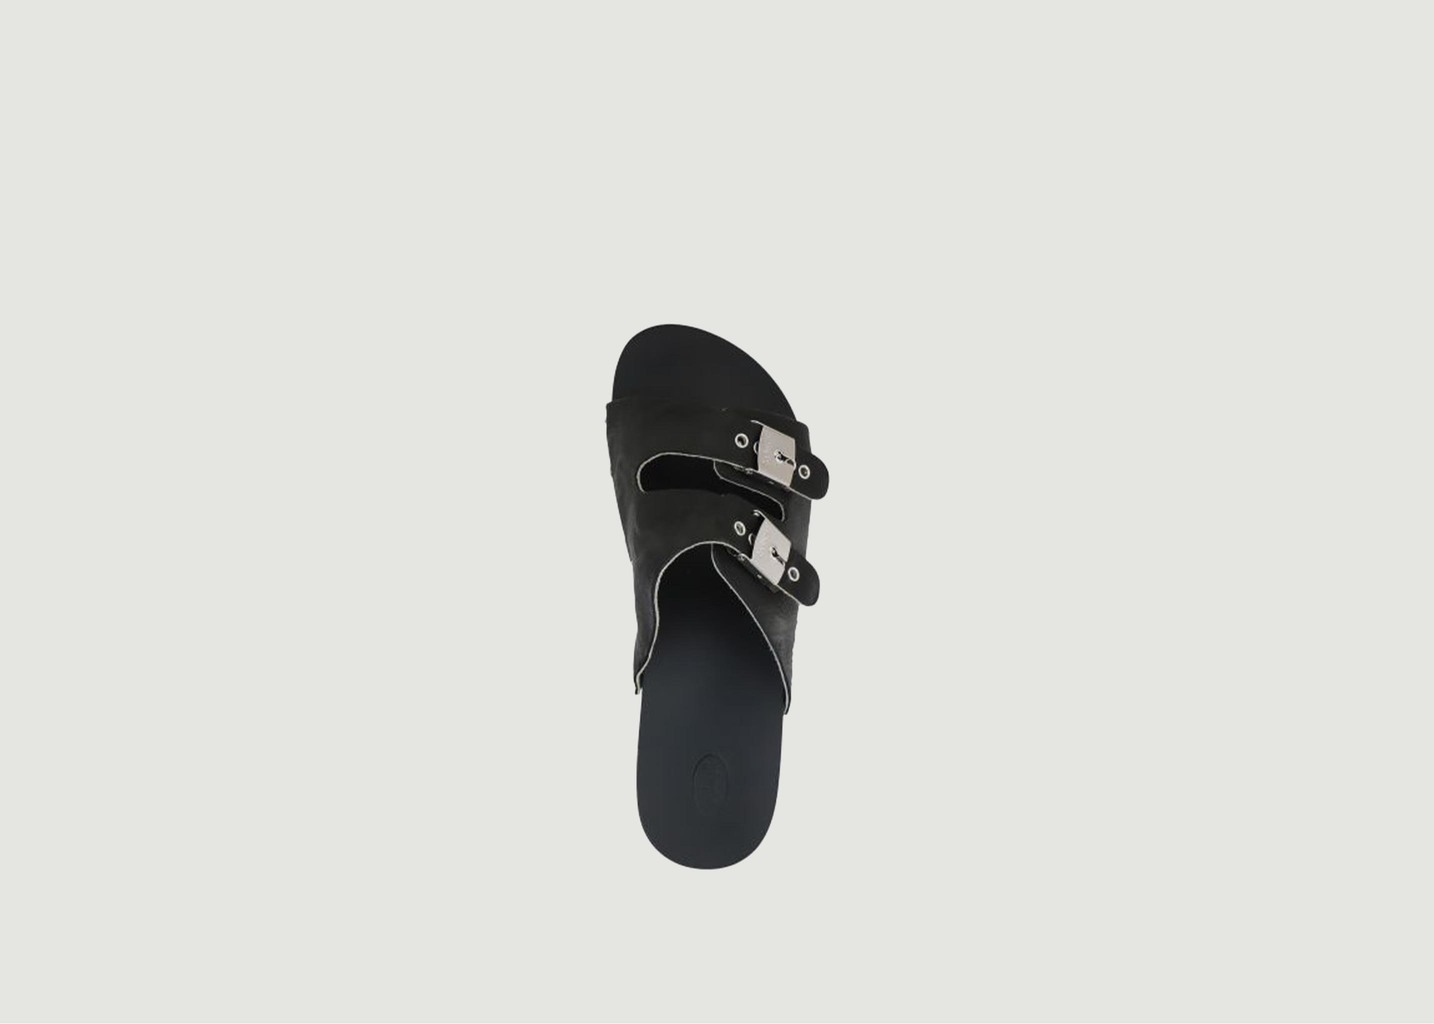 Pescura sandals in leather and wood - Scholl